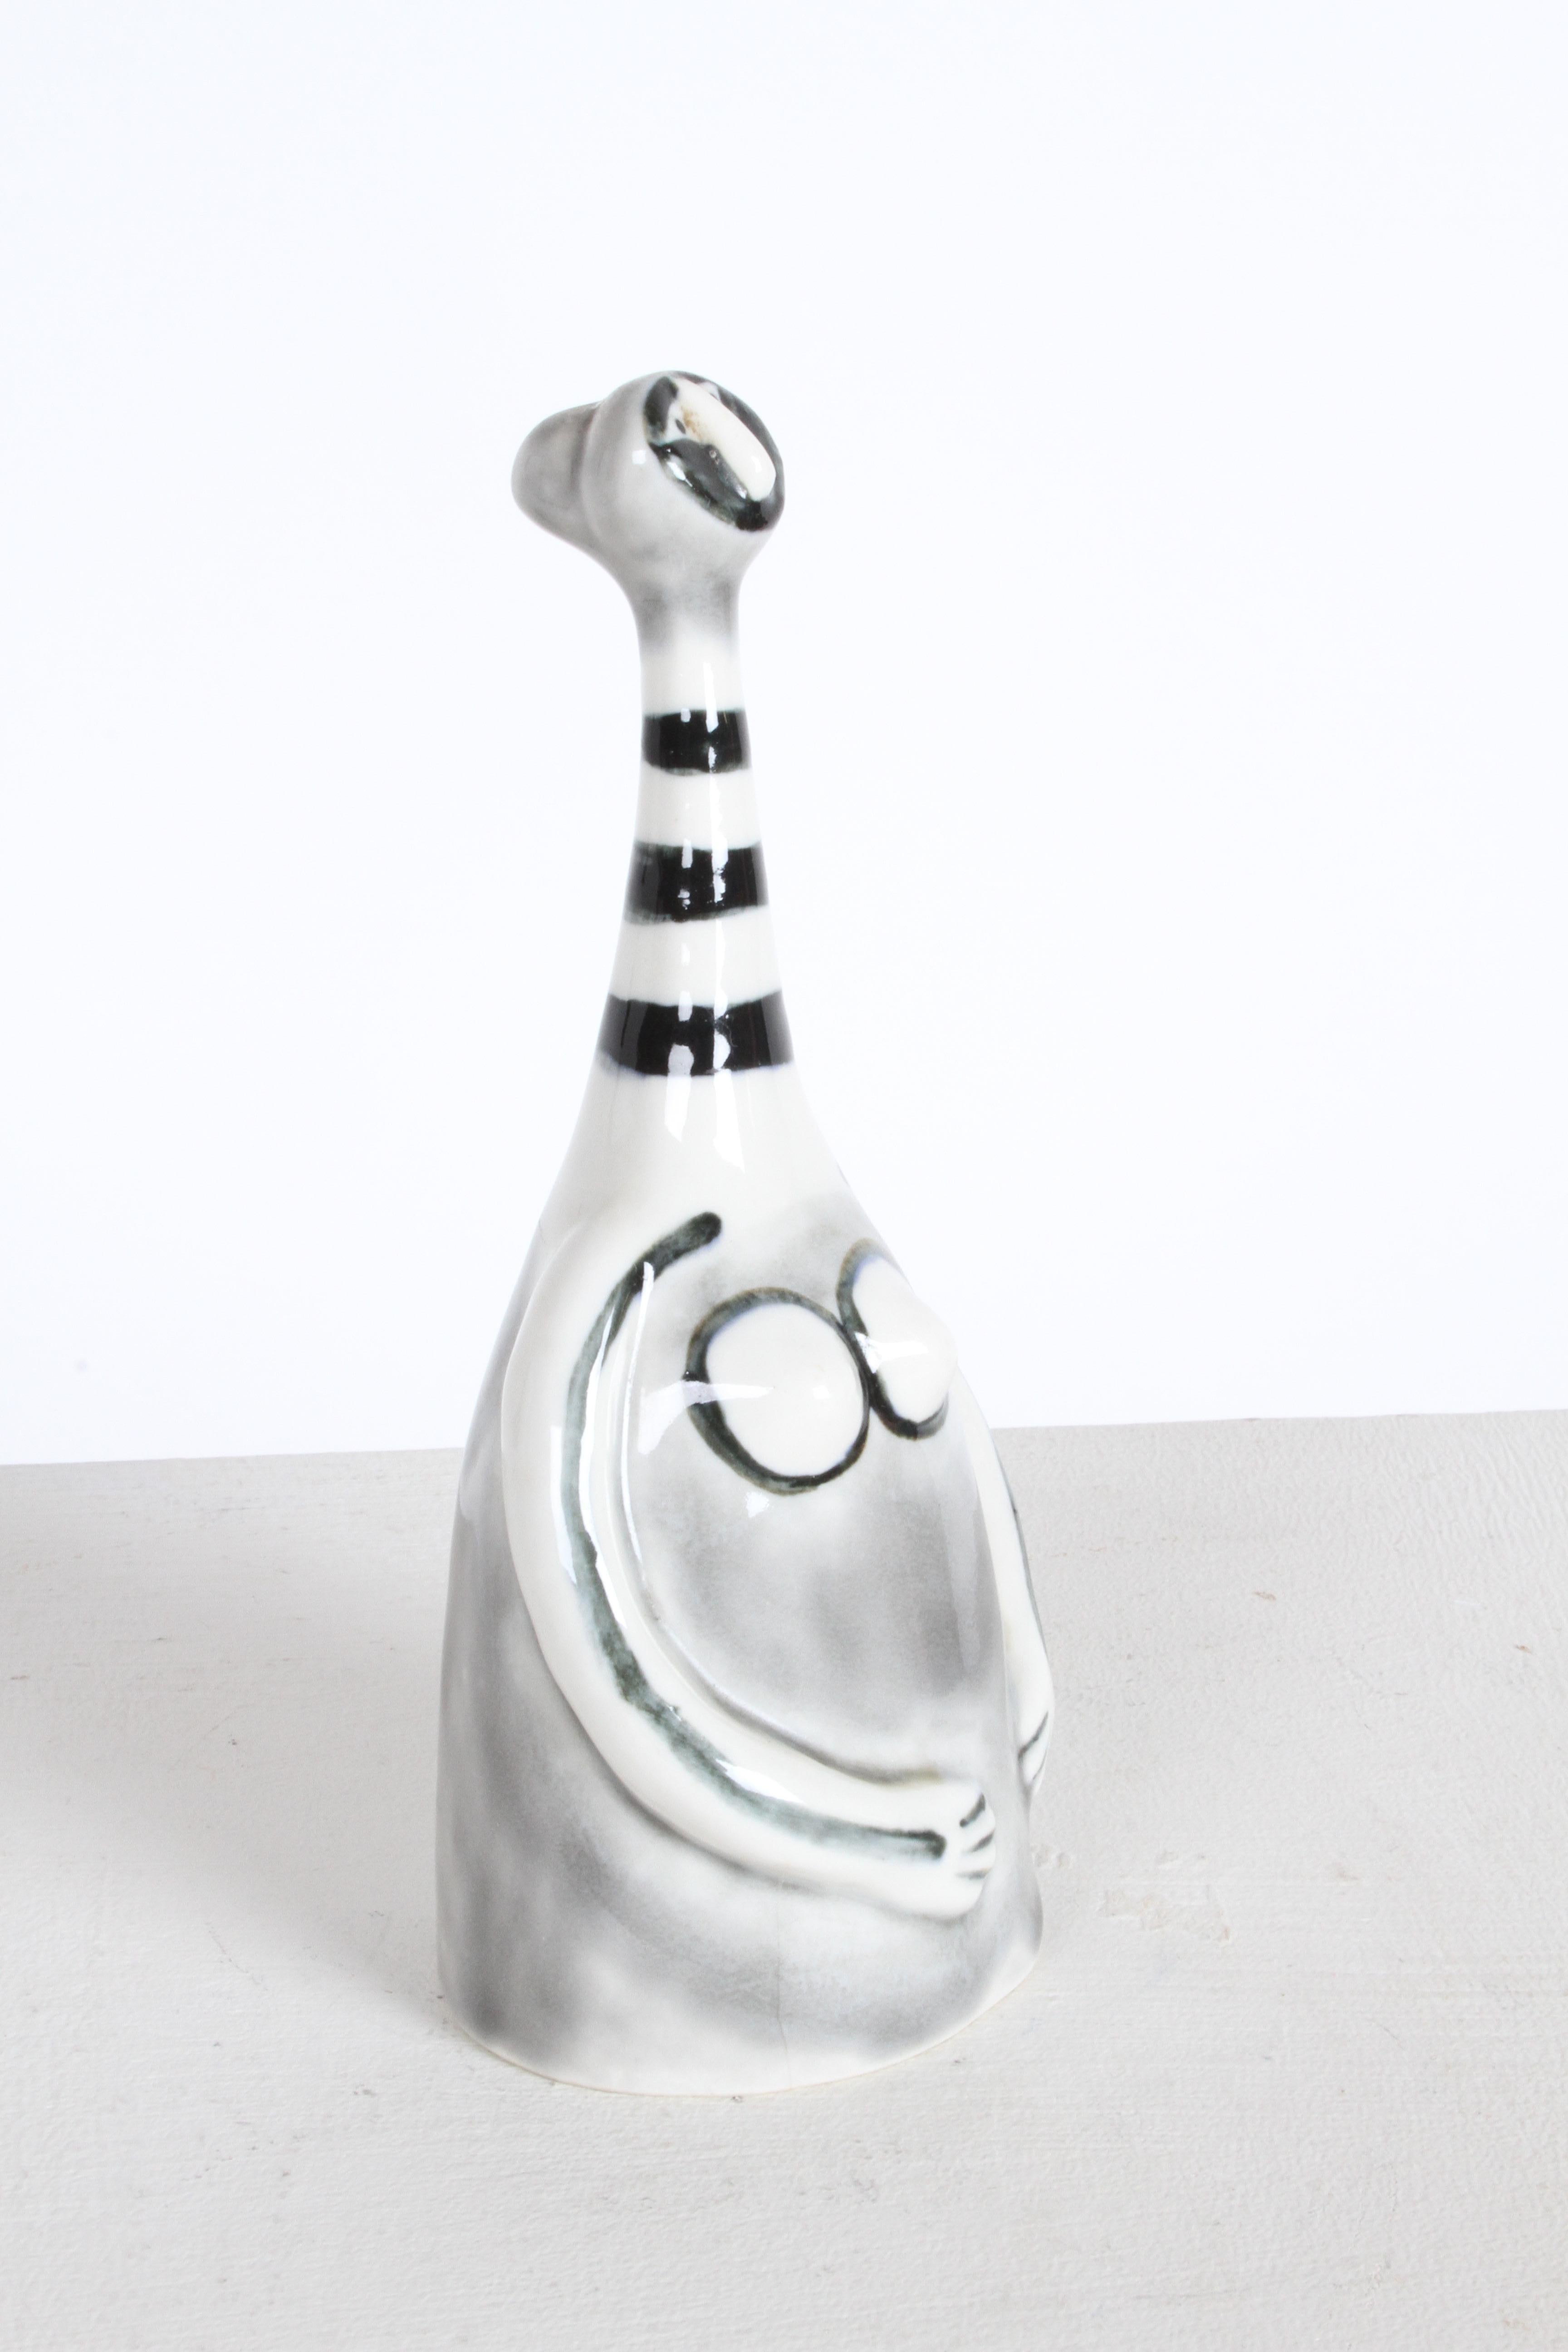 Mid-Century Modern Picassoesque Ceramic Figure Dinner Bell by Jack Squier for Howat Kilns - Mexico For Sale